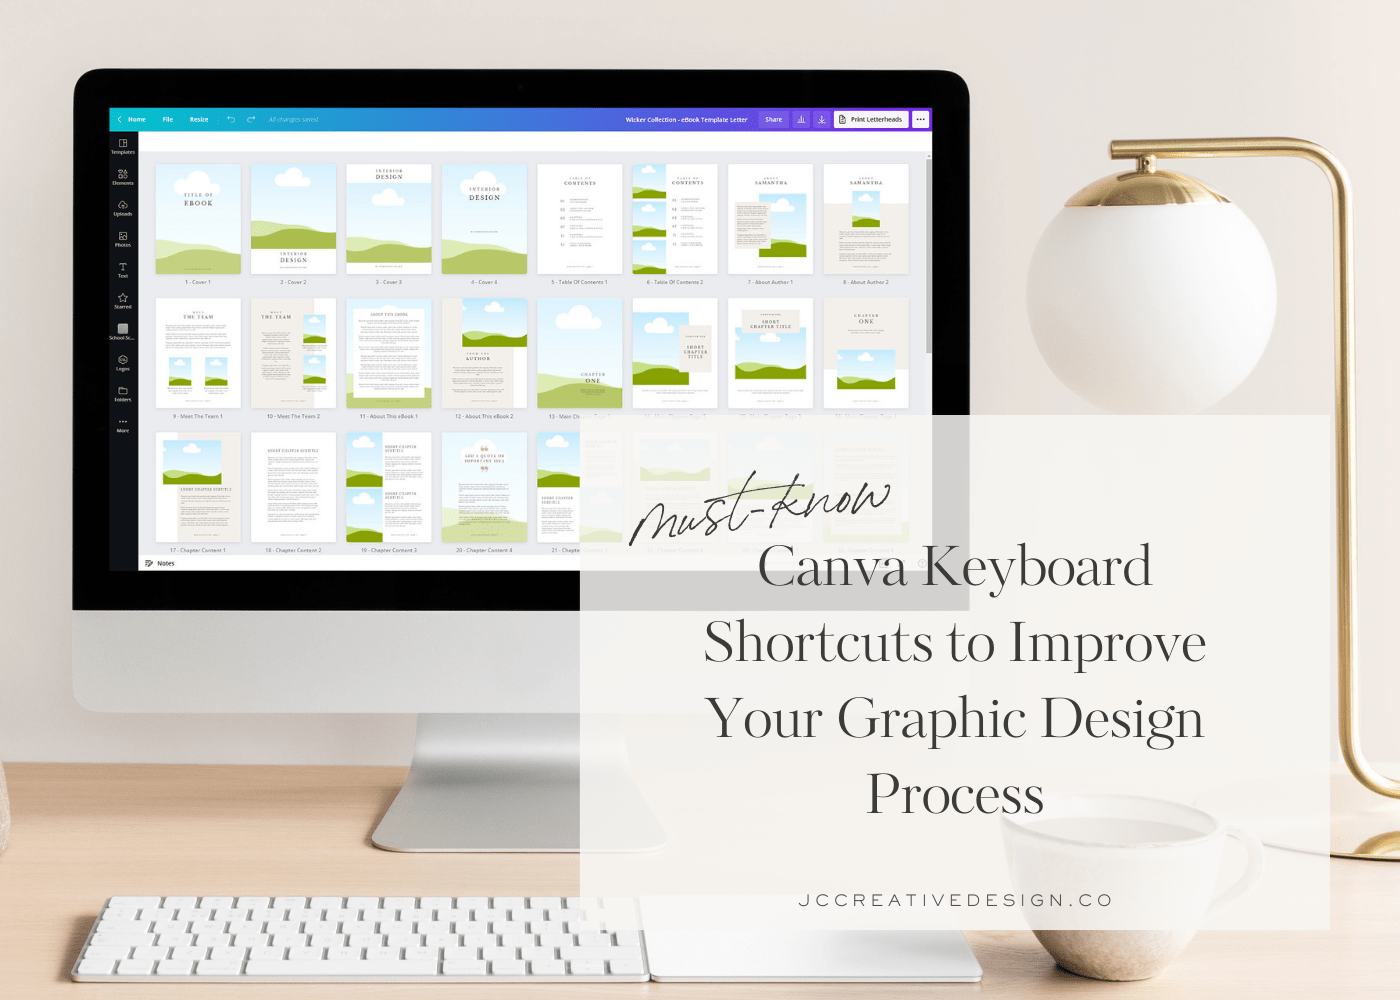 Must-Know Canva Keyboard shortcuts to Improve Your Graphic Design Process